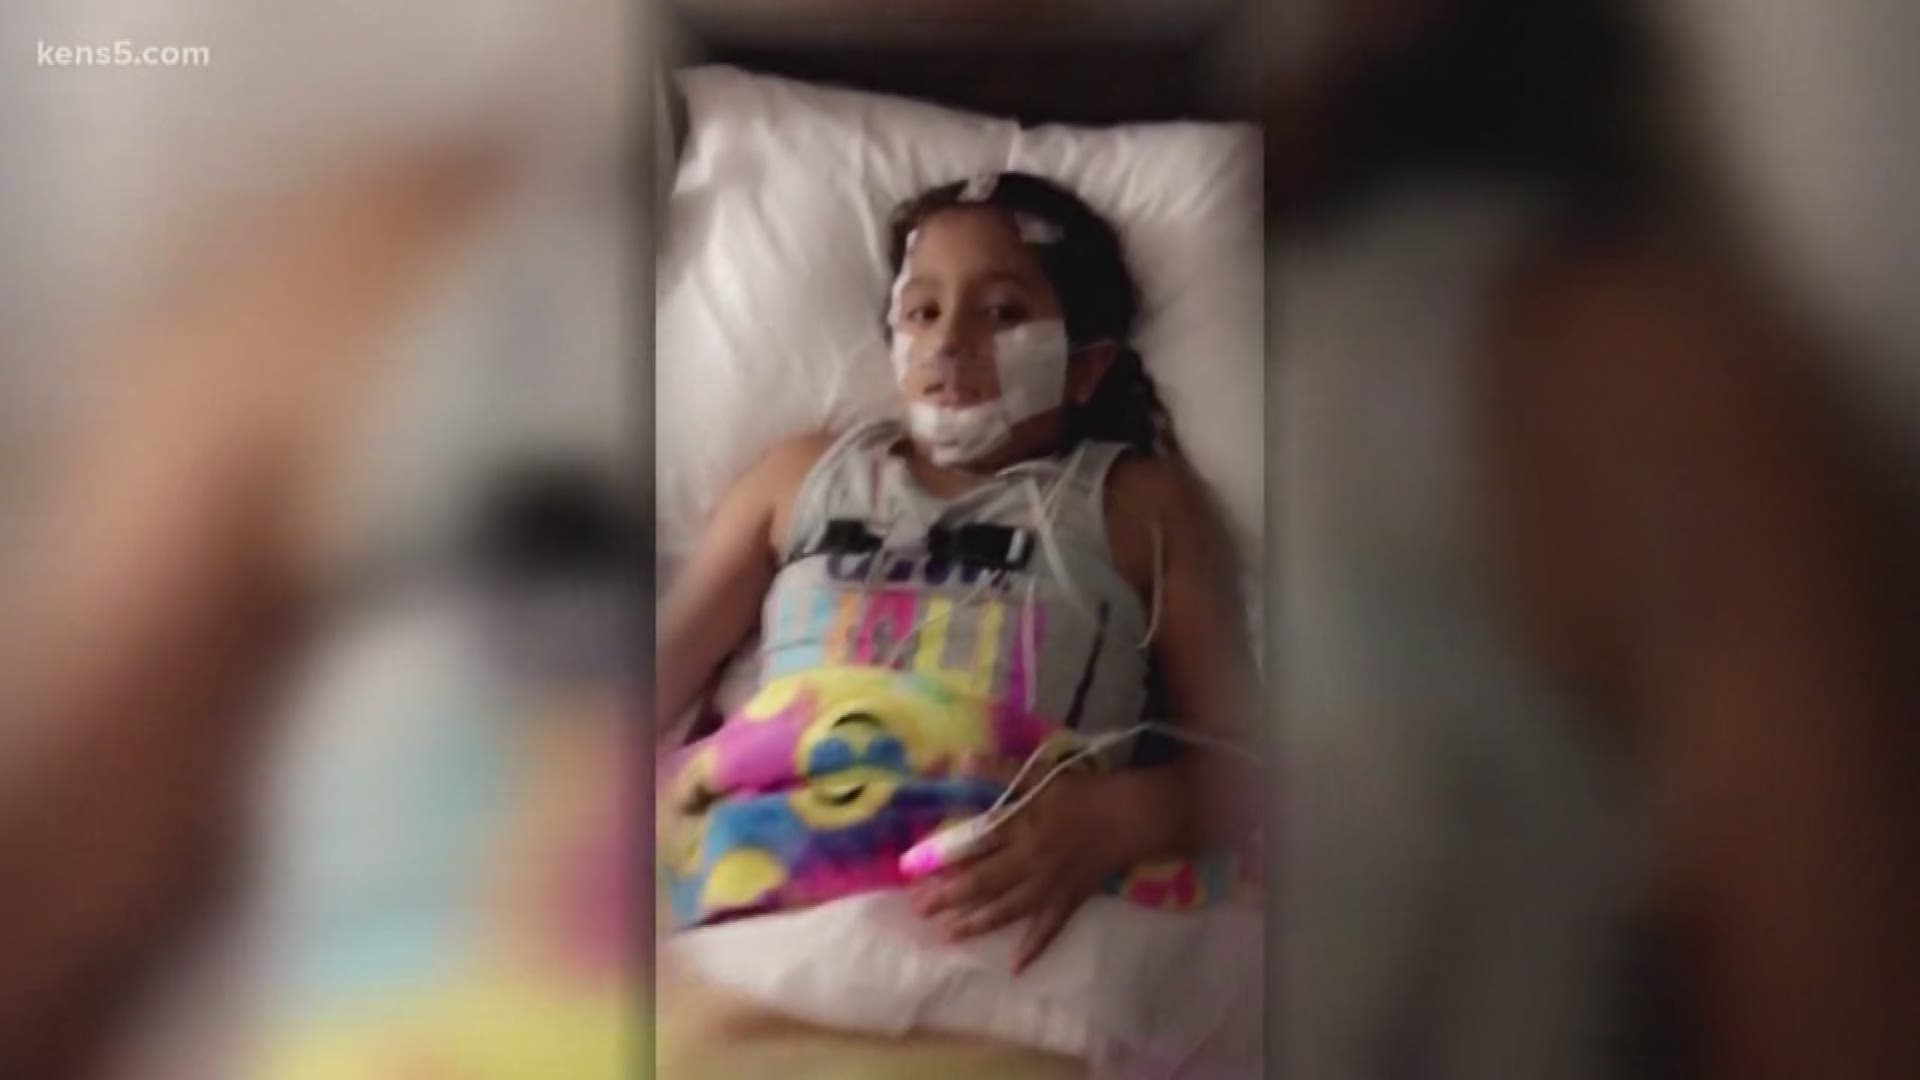 A San Antonio child was bullied for her breathing problems, but an orthodontist helped solve her issue after just a 15-minute consultation. Eyewitness News reporter Sharon Ko explains.